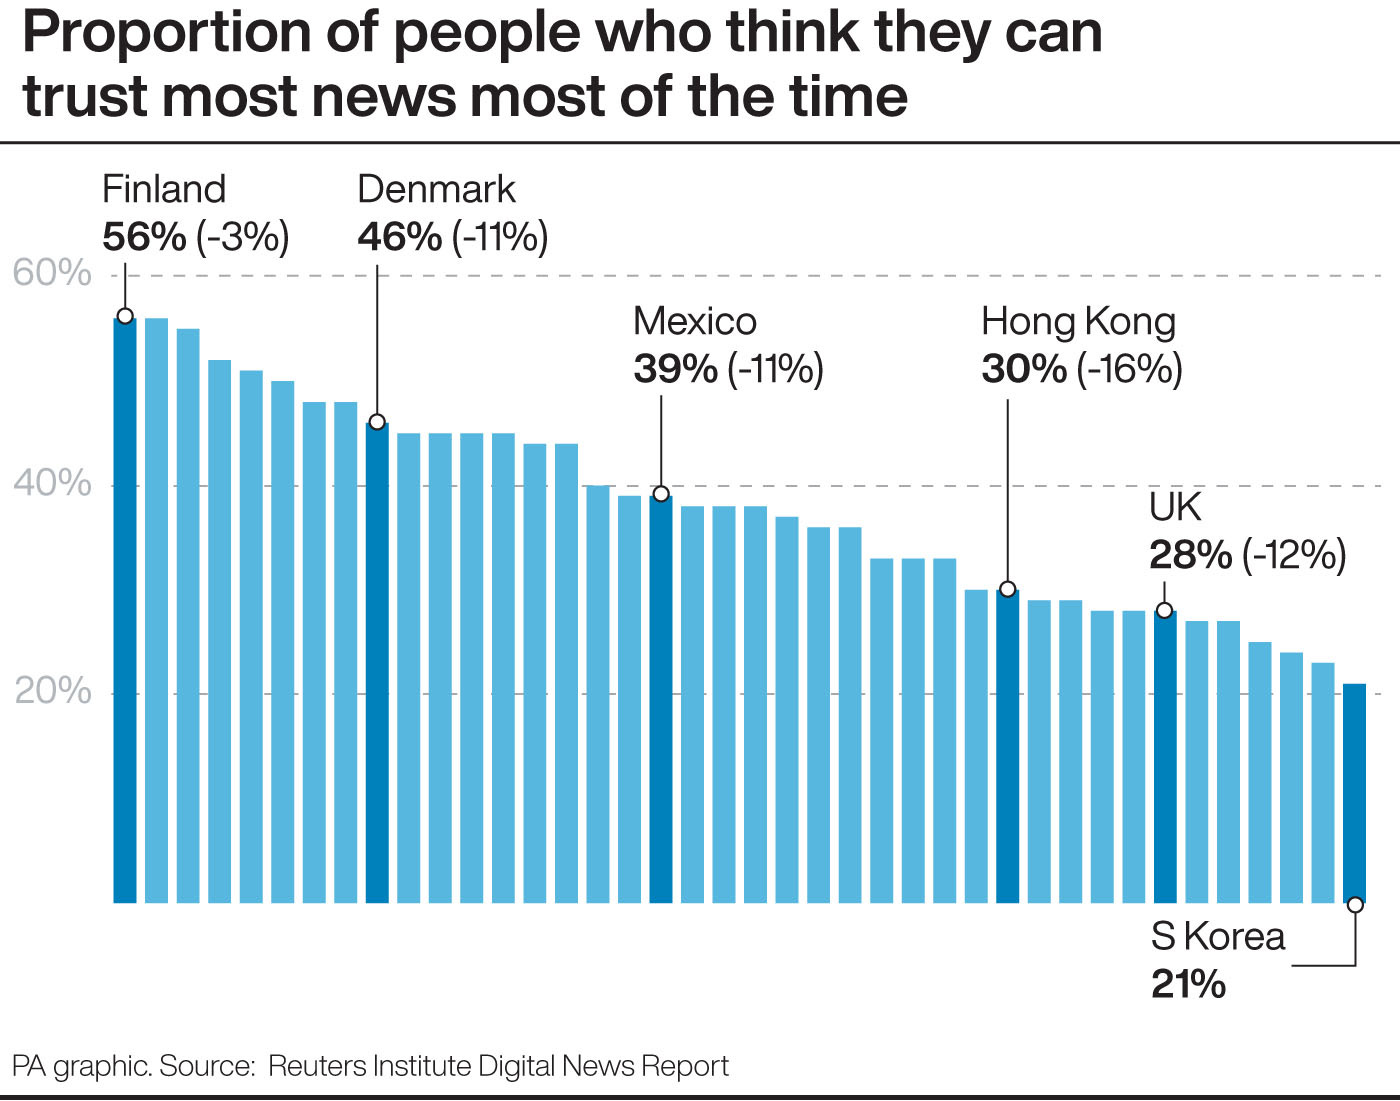 Proportion of people who think they can trust most news most of the time